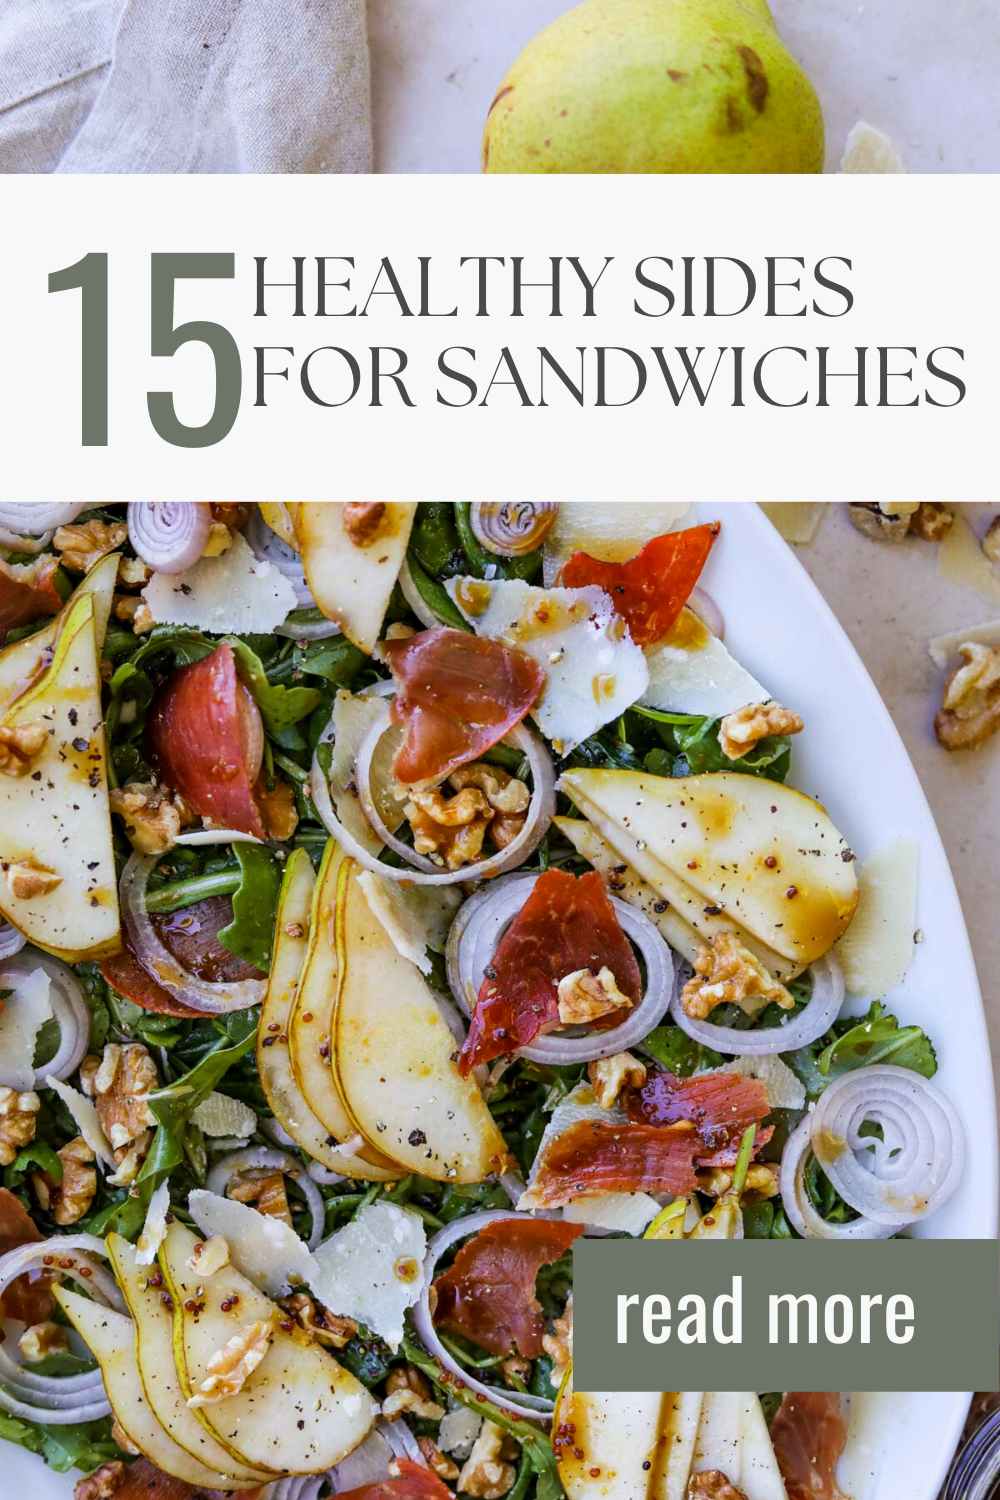 15 healthy sides for sandwiches, including prosciutto pear arugula salad Pinterest pin.